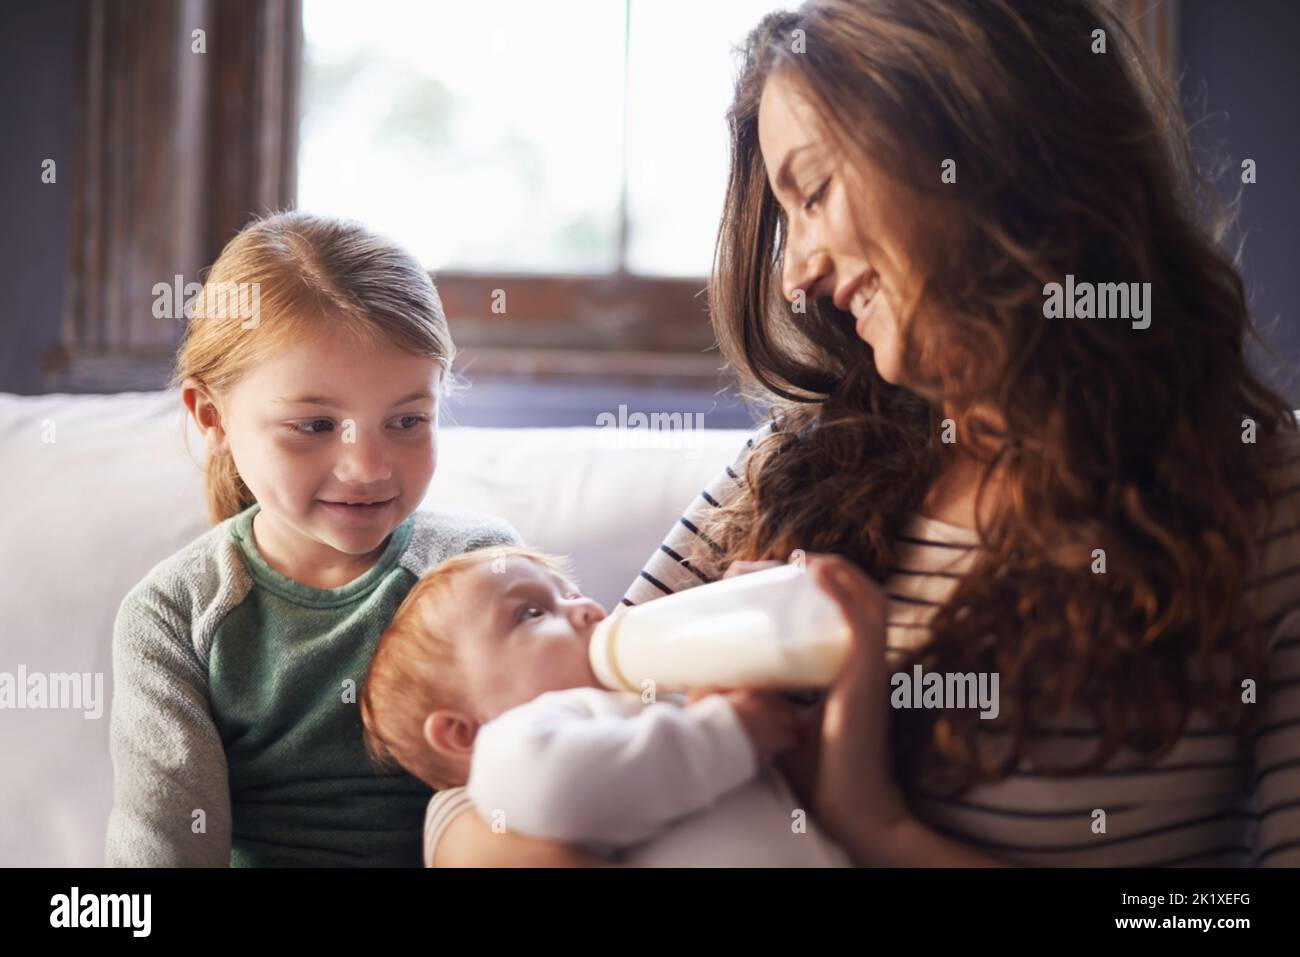 She loves her little sister. A shot of a family spending time together while mom nurses baby. Stock Photo